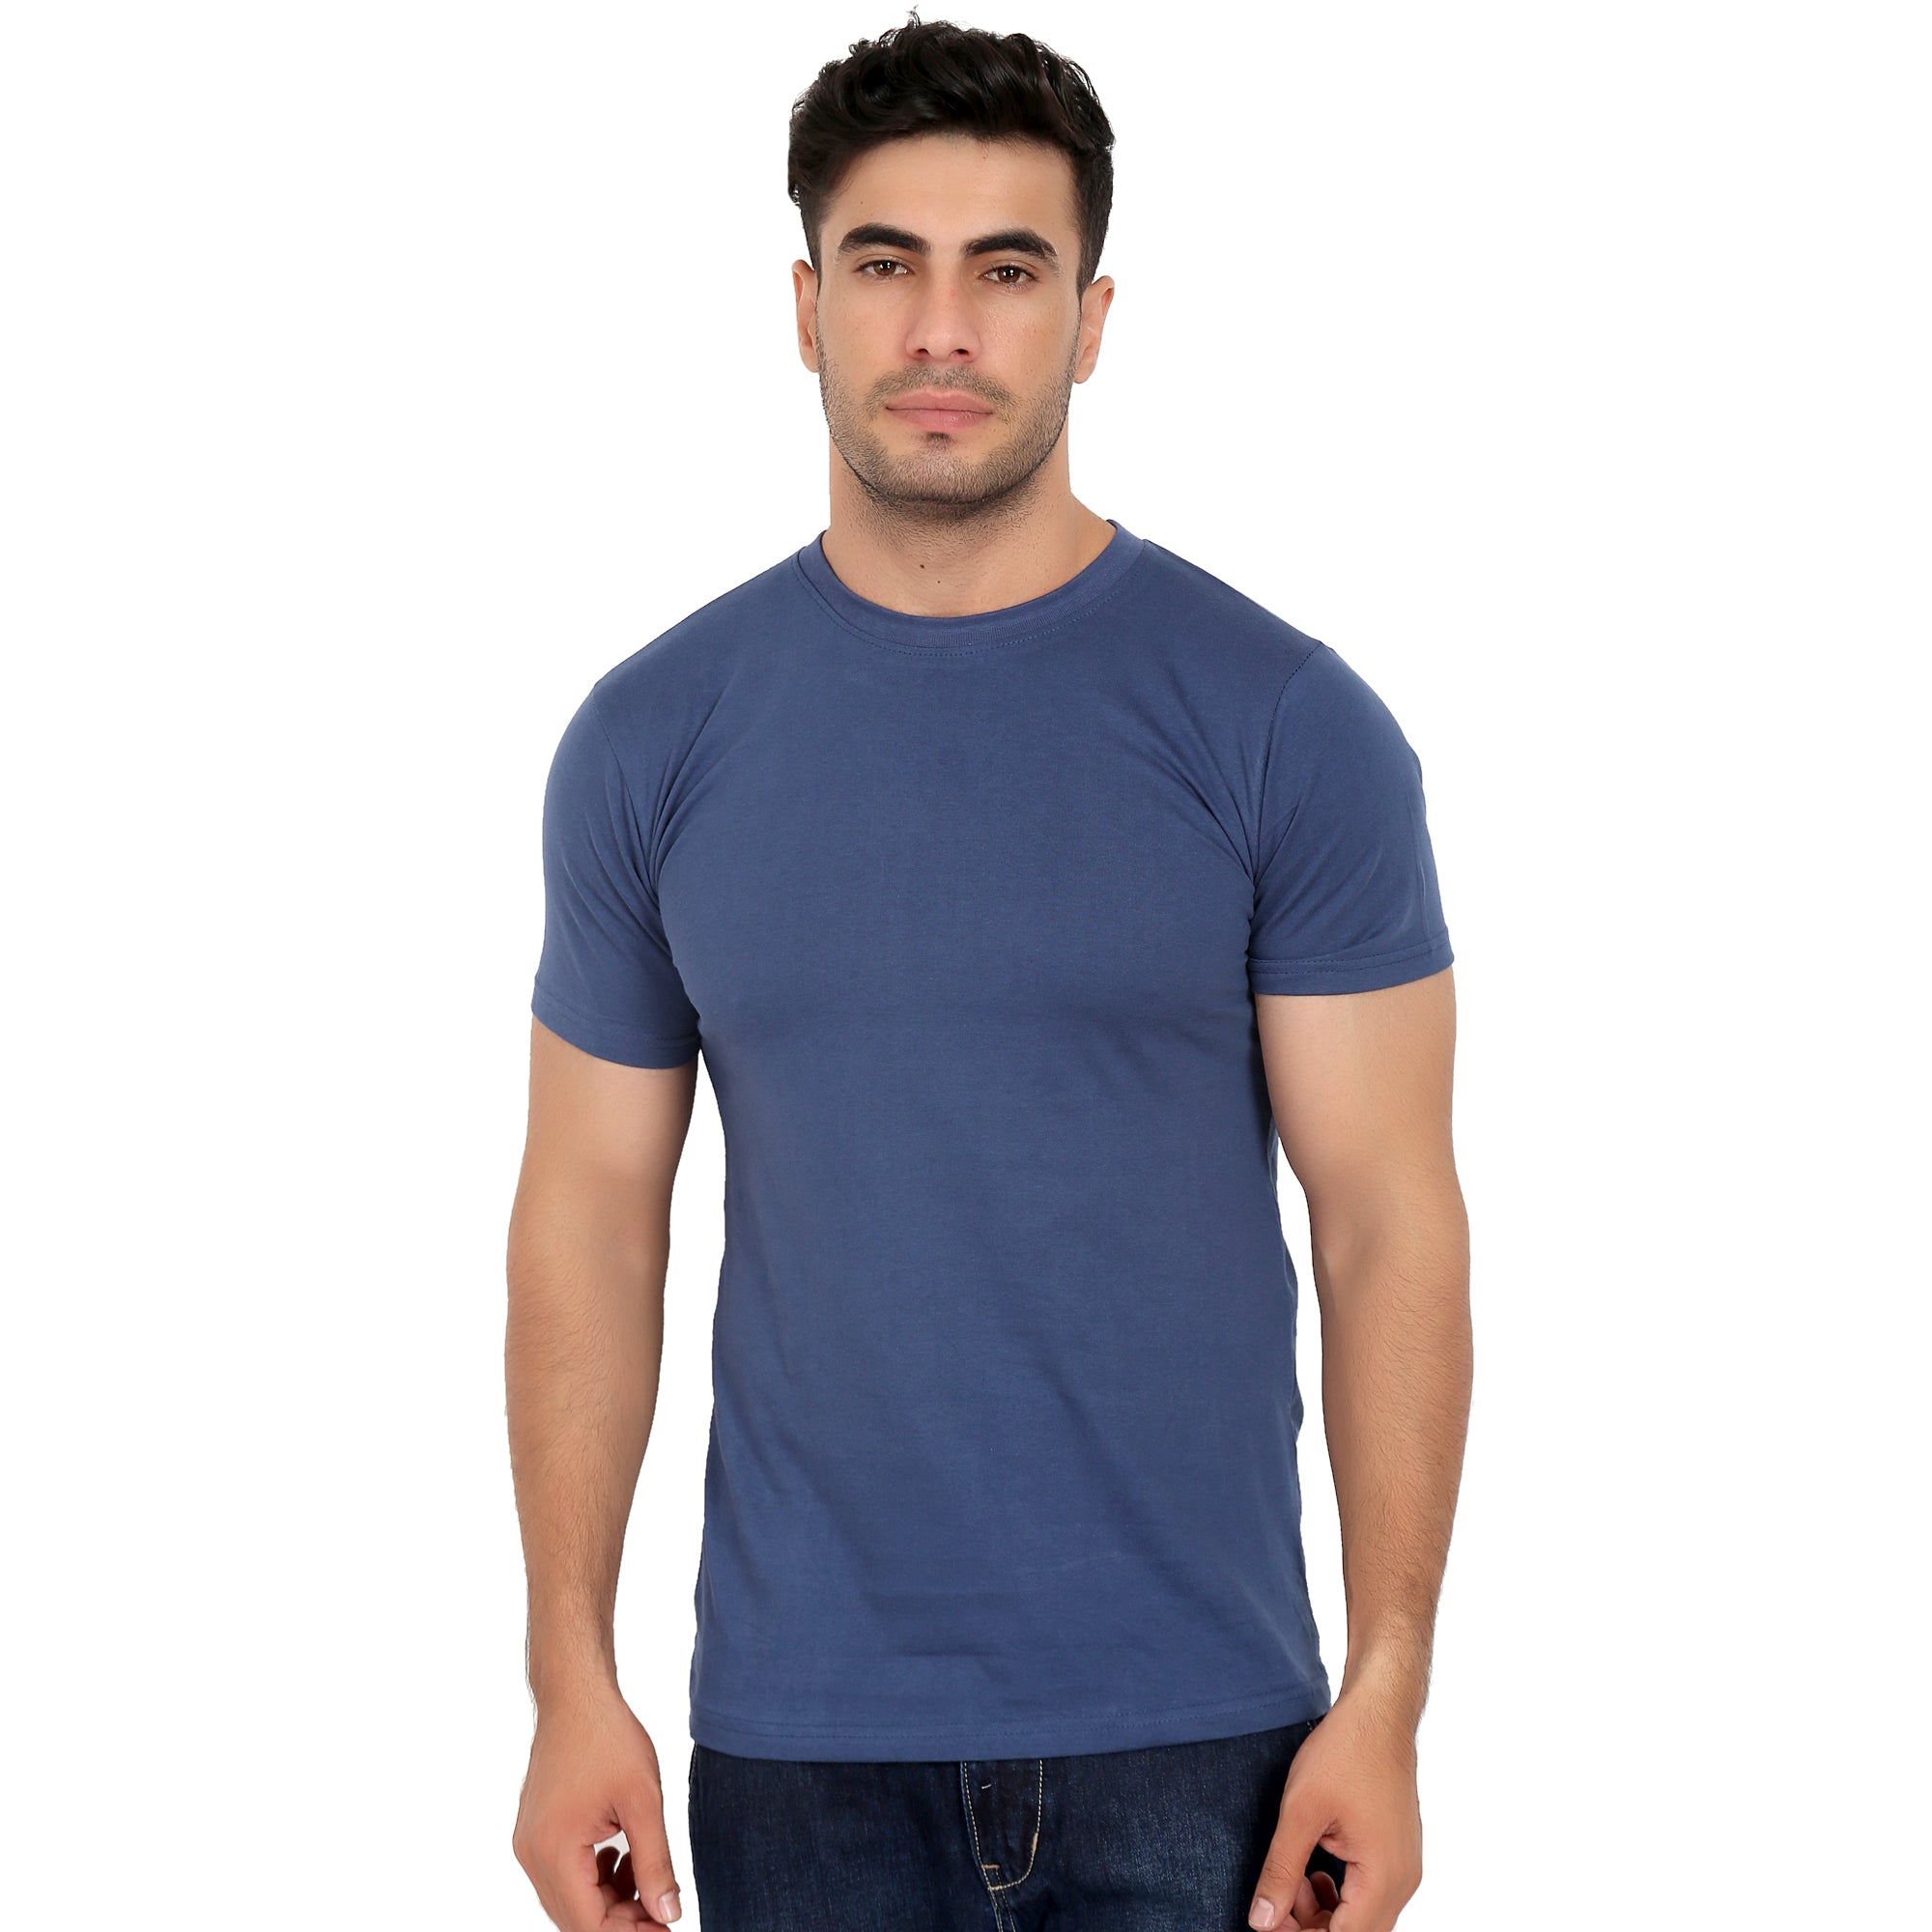 Combo Offer - Men Crew Neck Cotton T-Shirts - Half Sleeves - 3 Colors - Navy Blue, Blue & White